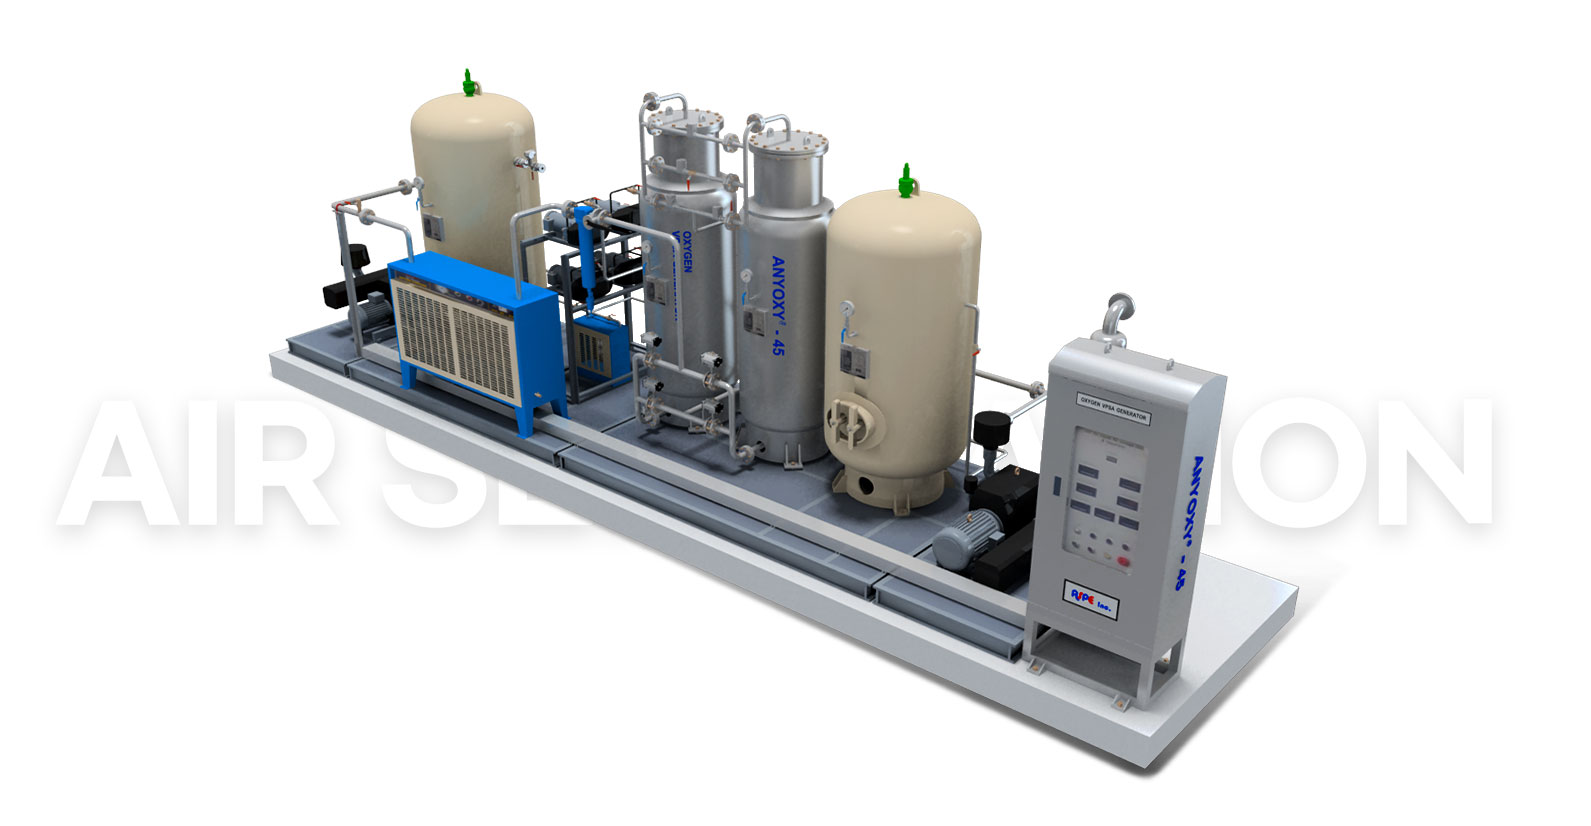 Aspe offers effective O2 vpsa package solutions through its expertise in Pressure Swing Adsorption and gas dryer